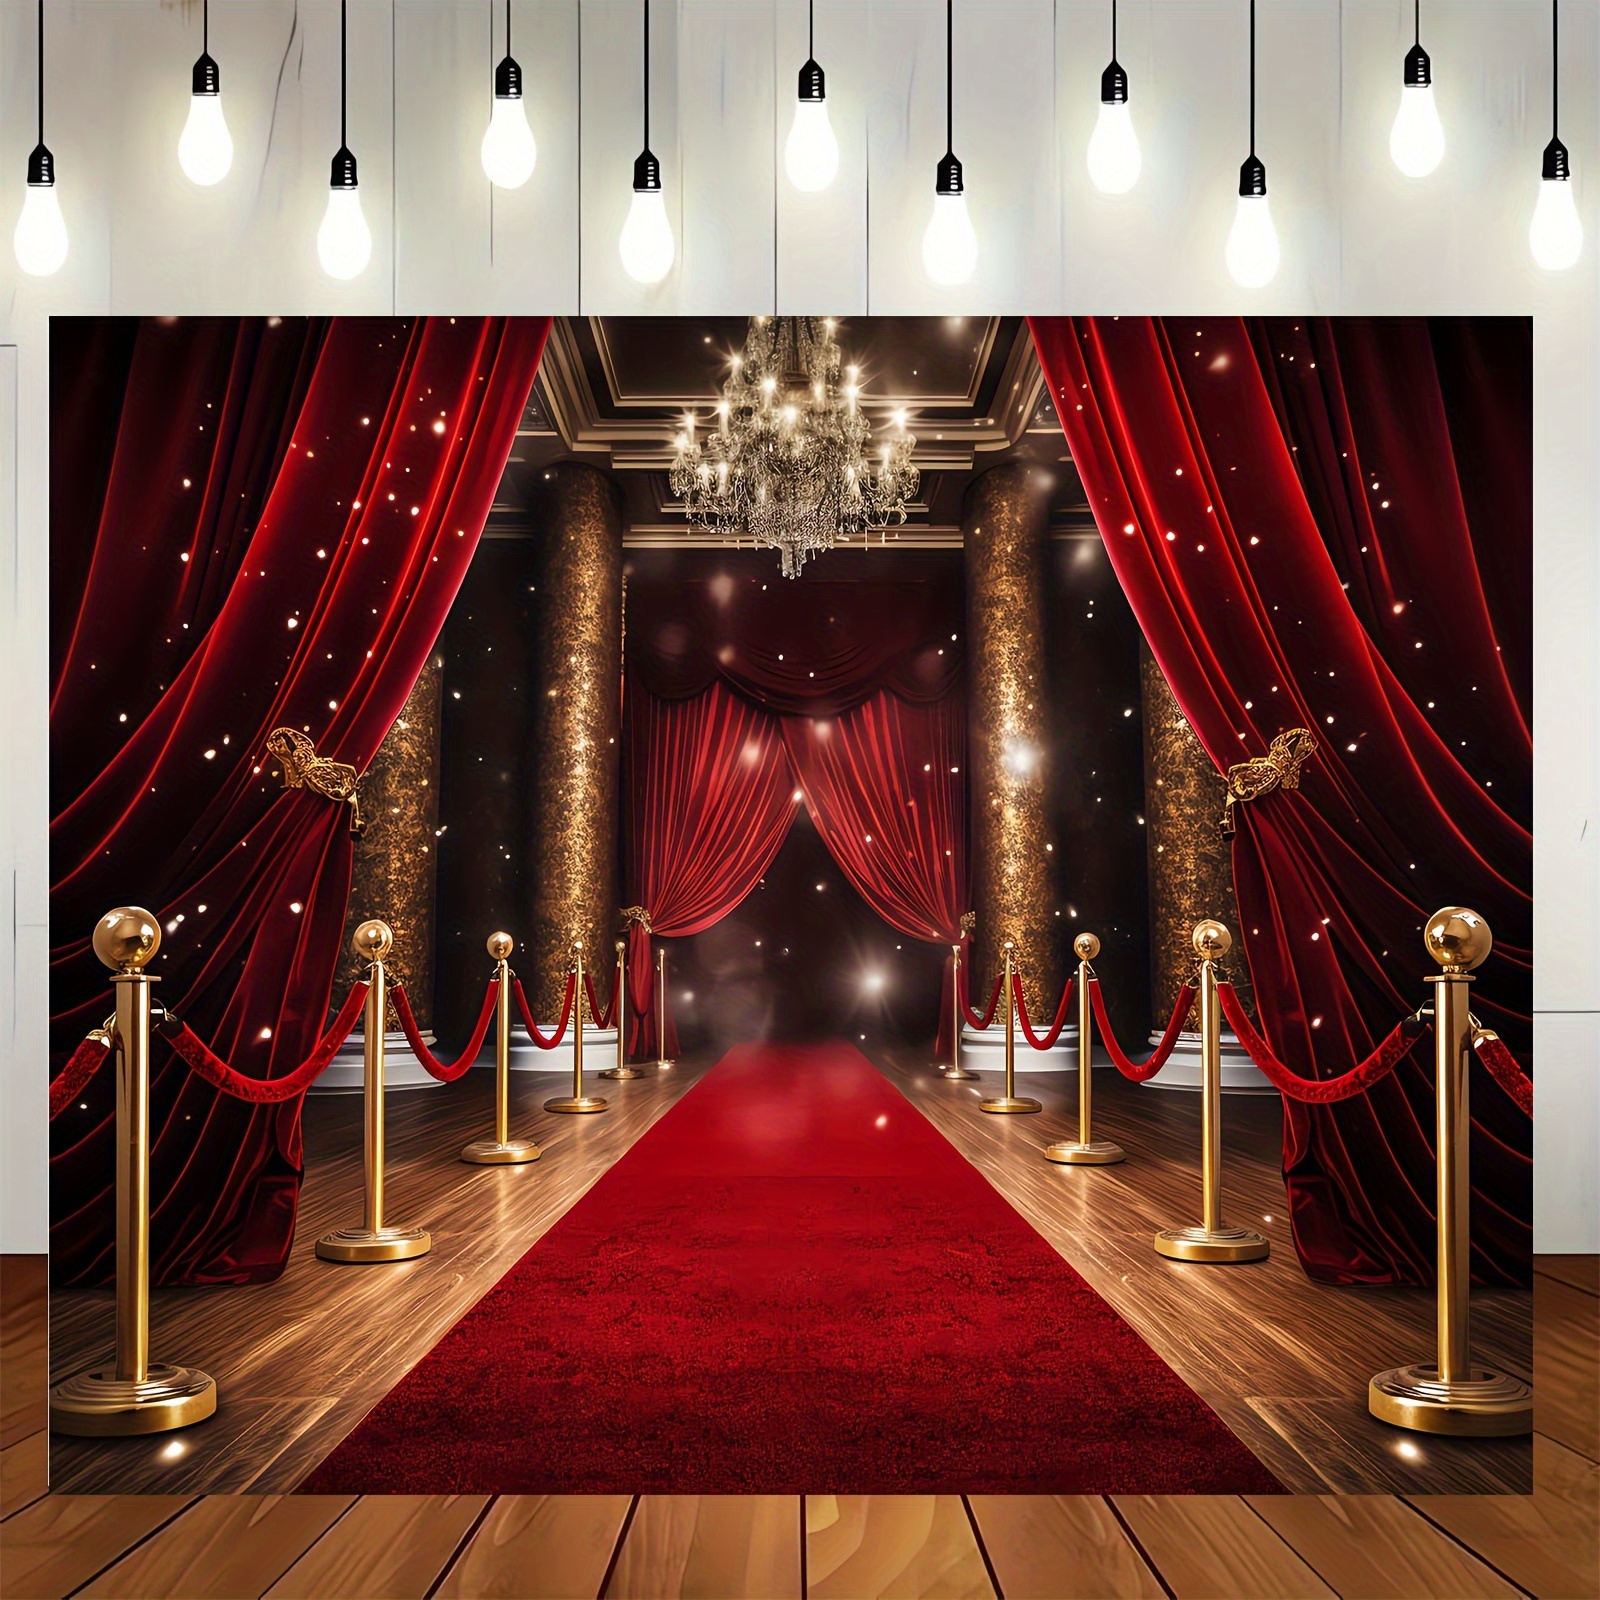 Grey Velvet Stanchion Rope with Gold Clasps 5 Feet, Crowd Control Ropes  Safety Barrier, Brown Velvet Rope for Grand Openings, Stanchion Hanging  Ropes